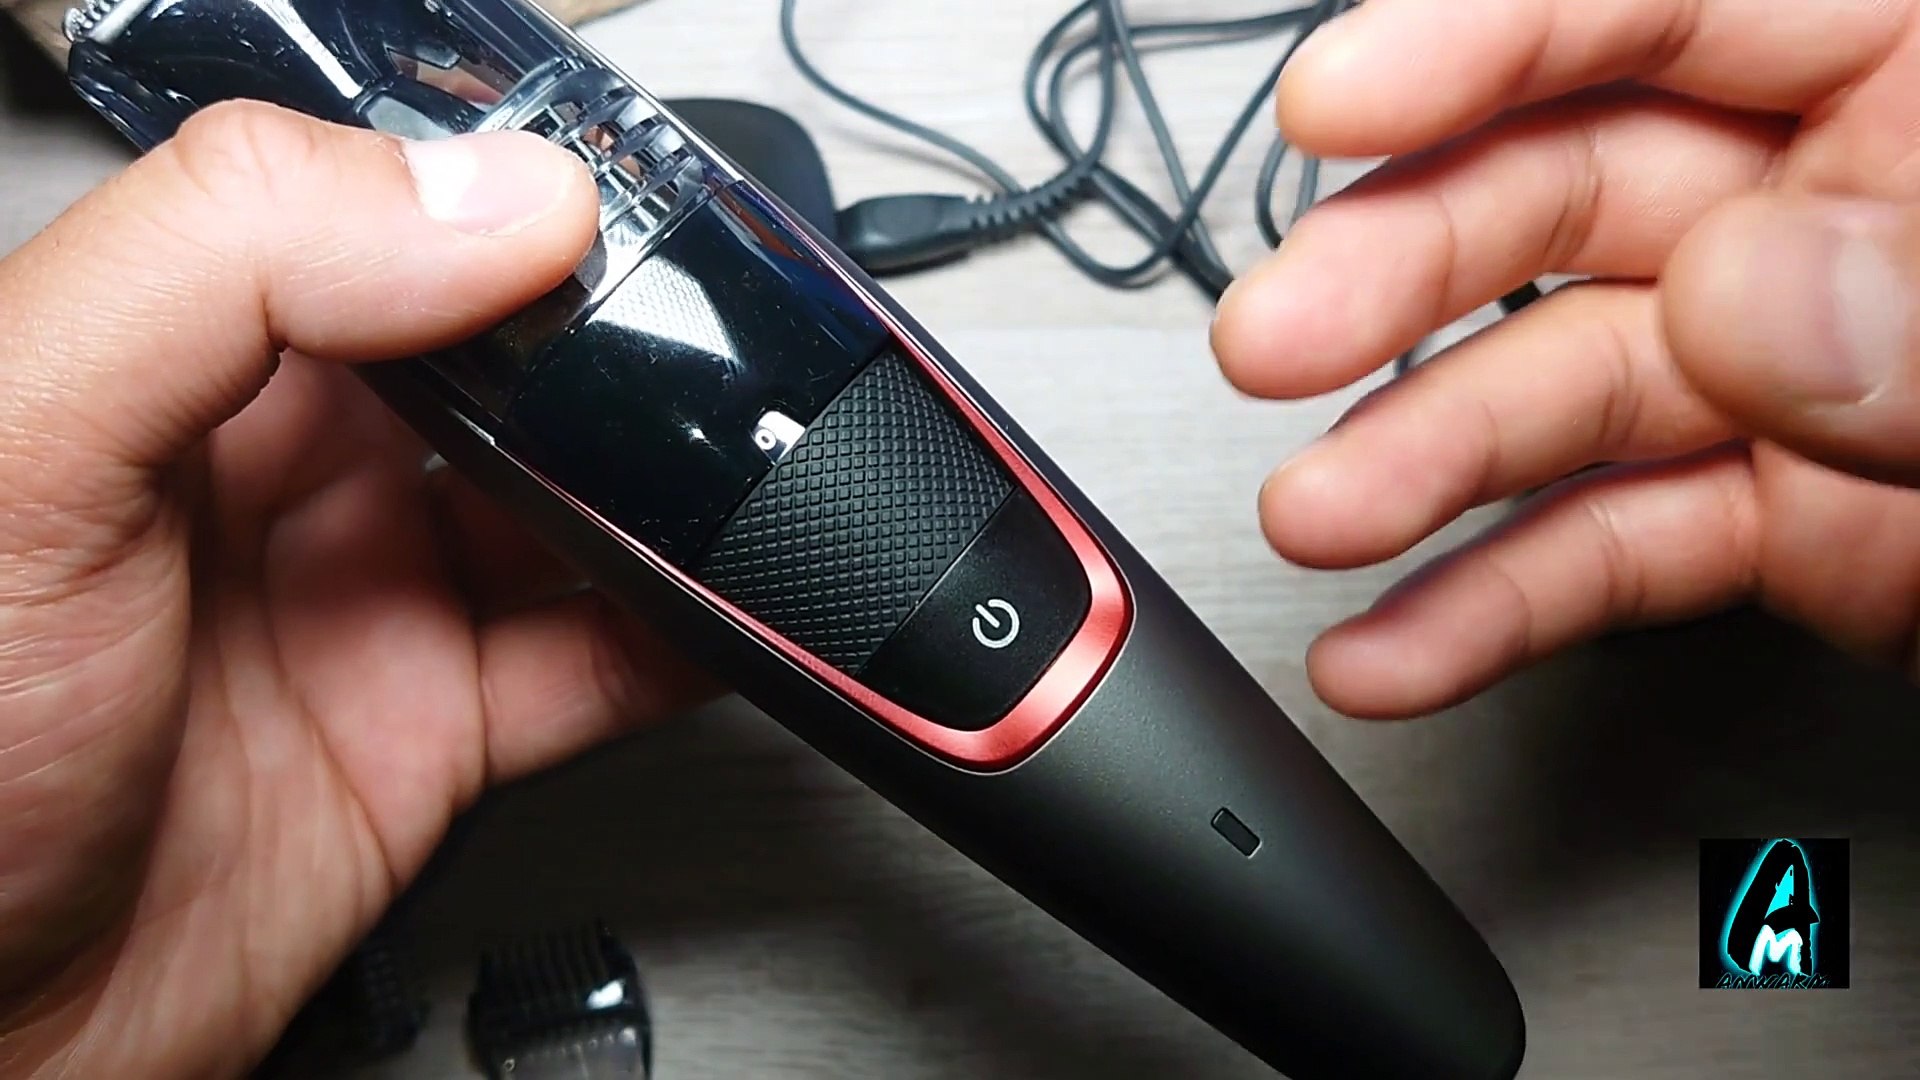 Philips Series 7000 Beard and Stubble Less Mess Vacuum Trimmer BT7512 ( Review) - video Dailymotion